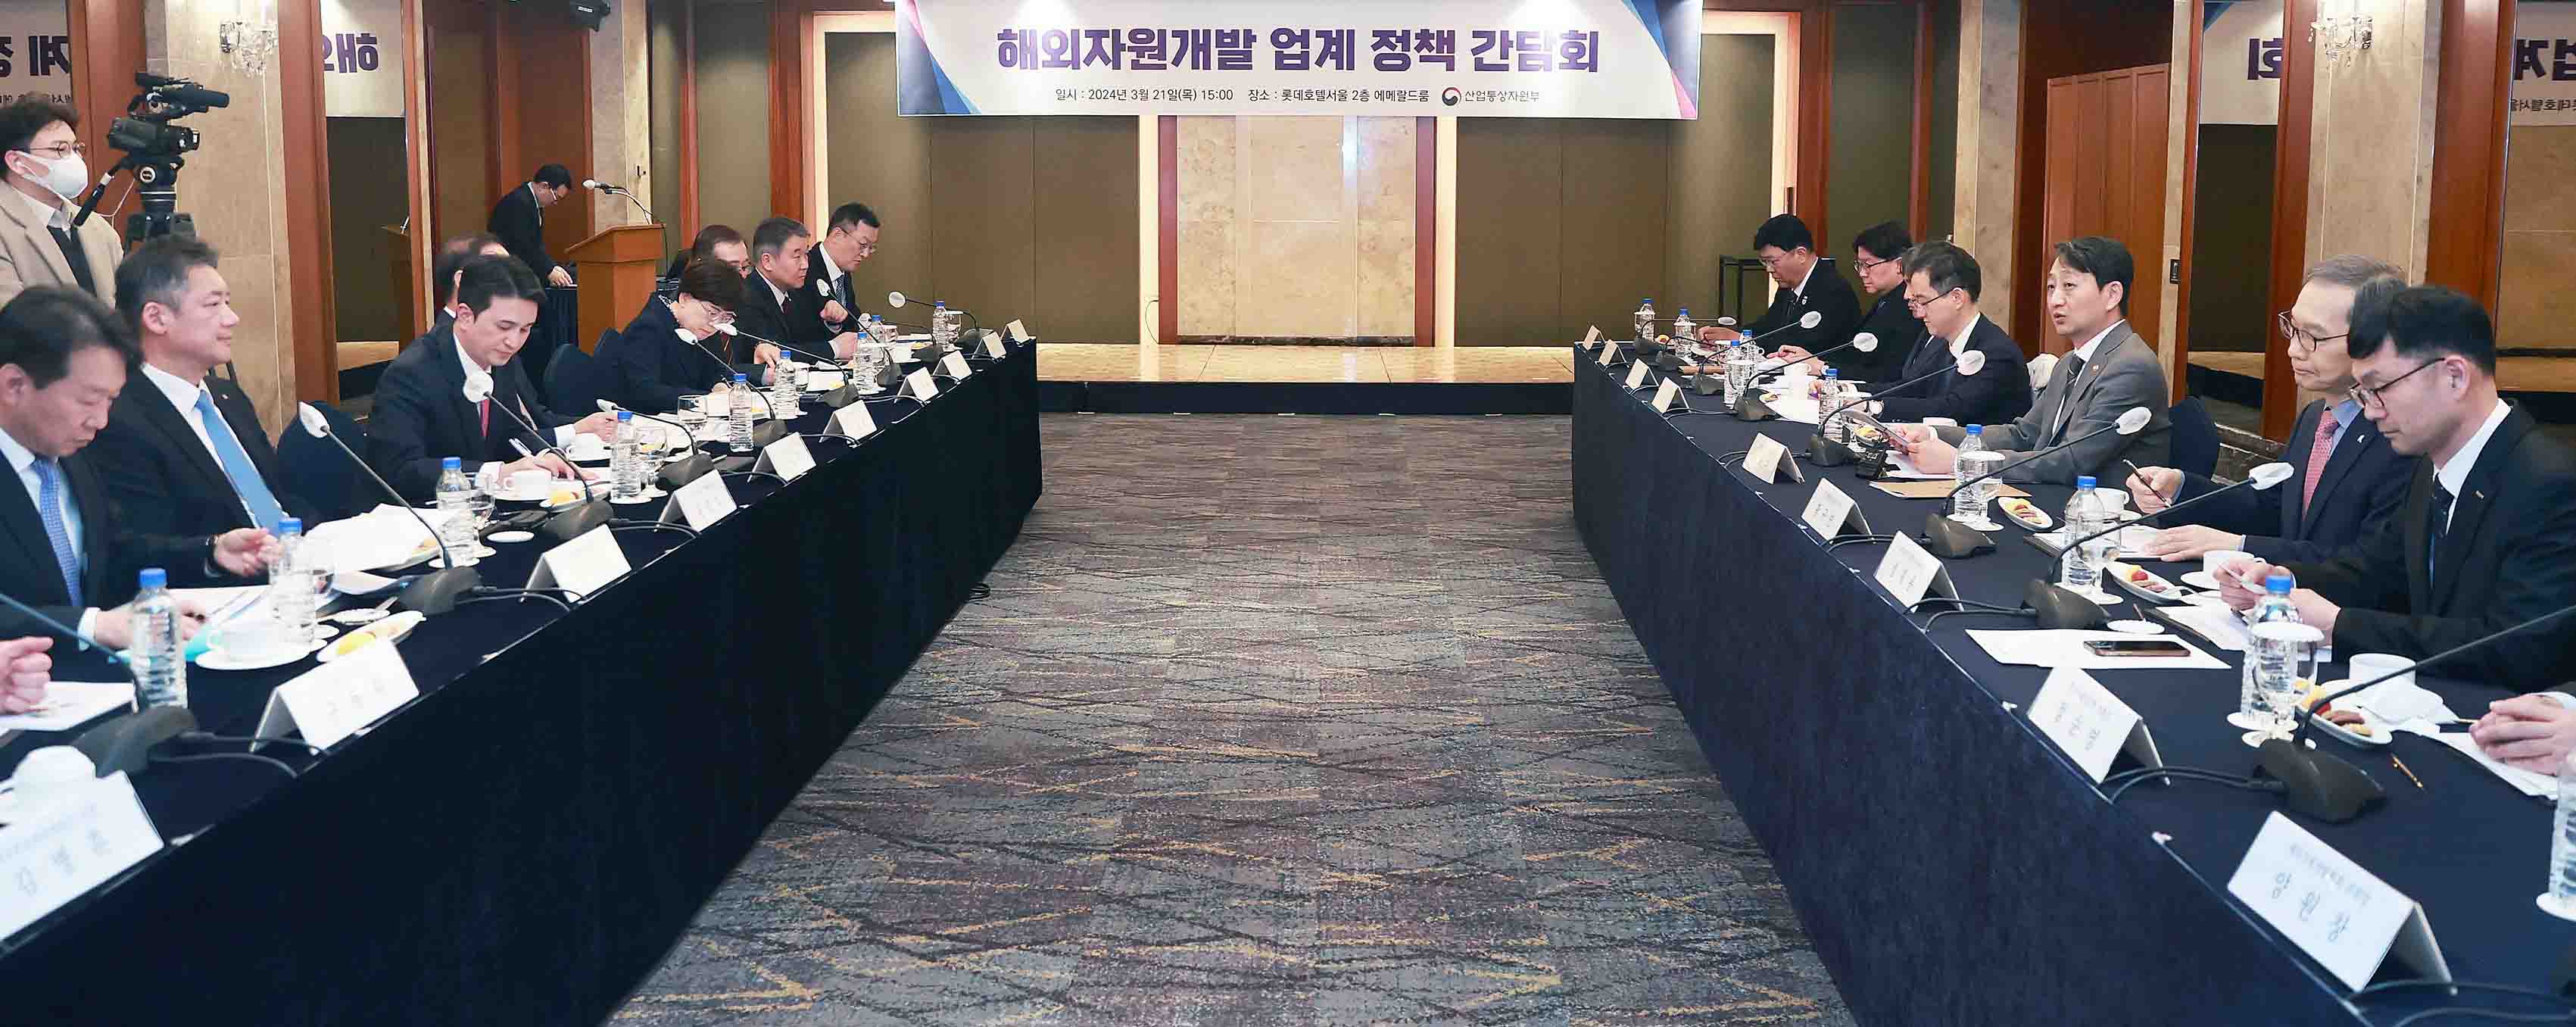 Minister Ahn chairs conference on overseas resources development_1